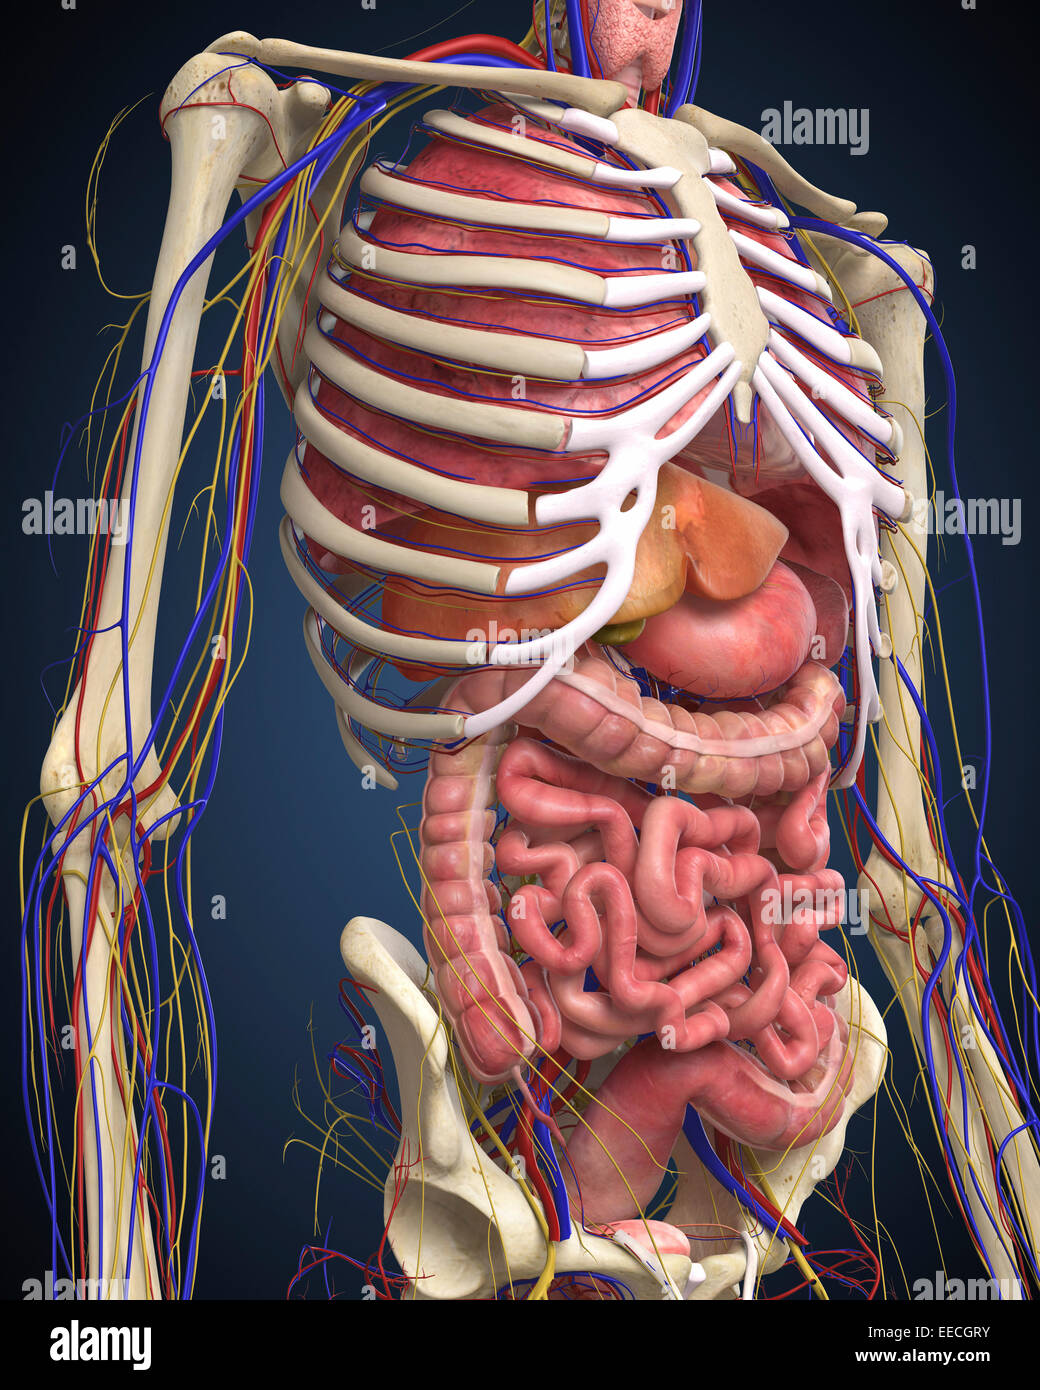 Human midsection with internal organs Stock Photo, Royalty Free Image